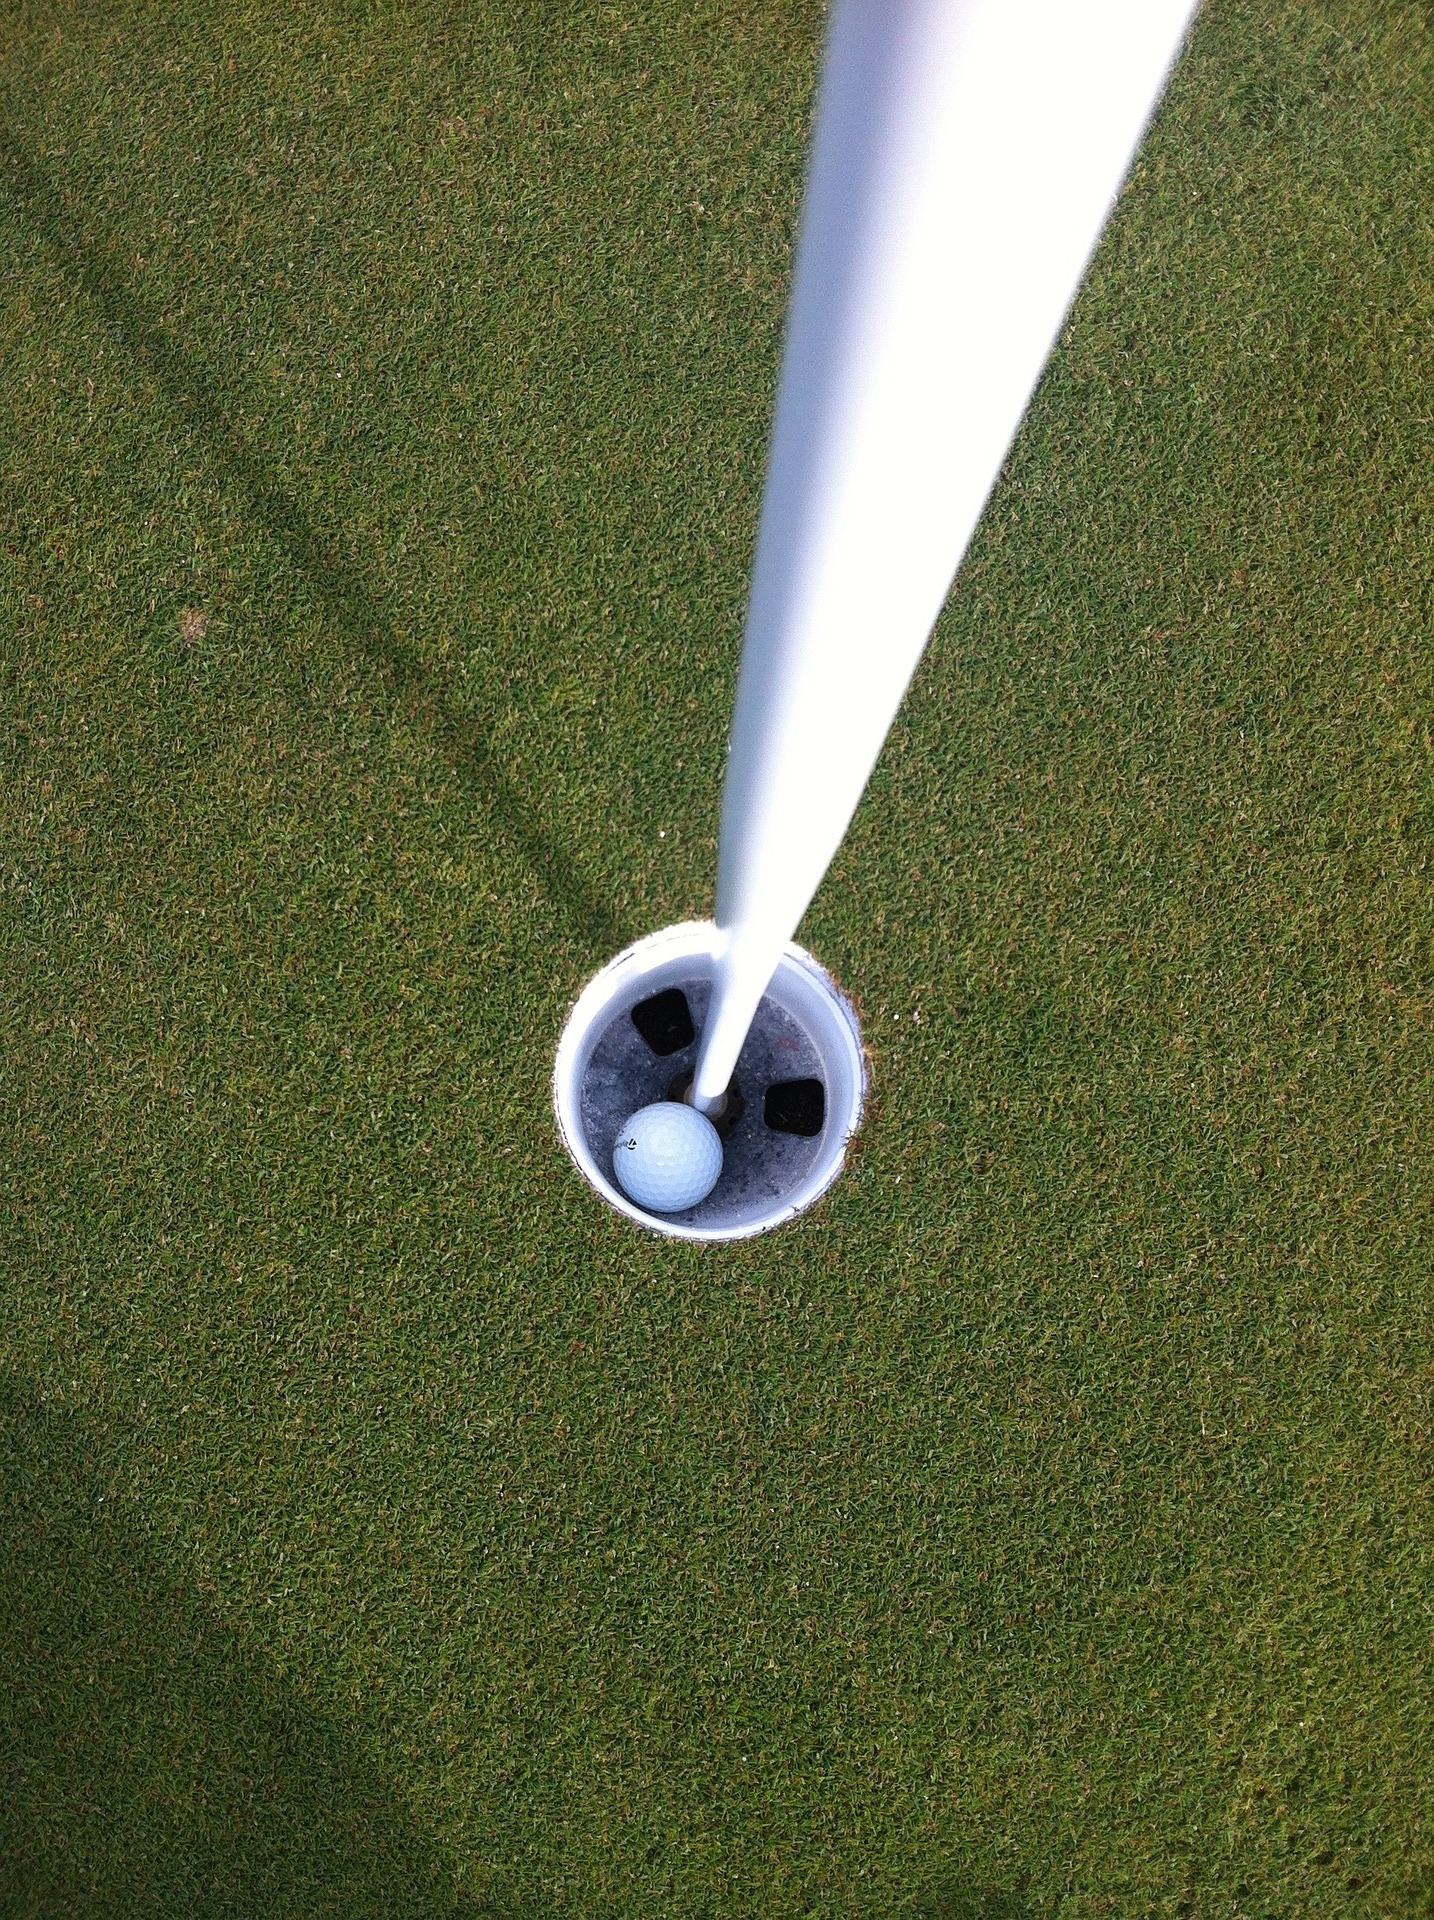 View of a golf ball inside the cup on a golf green.